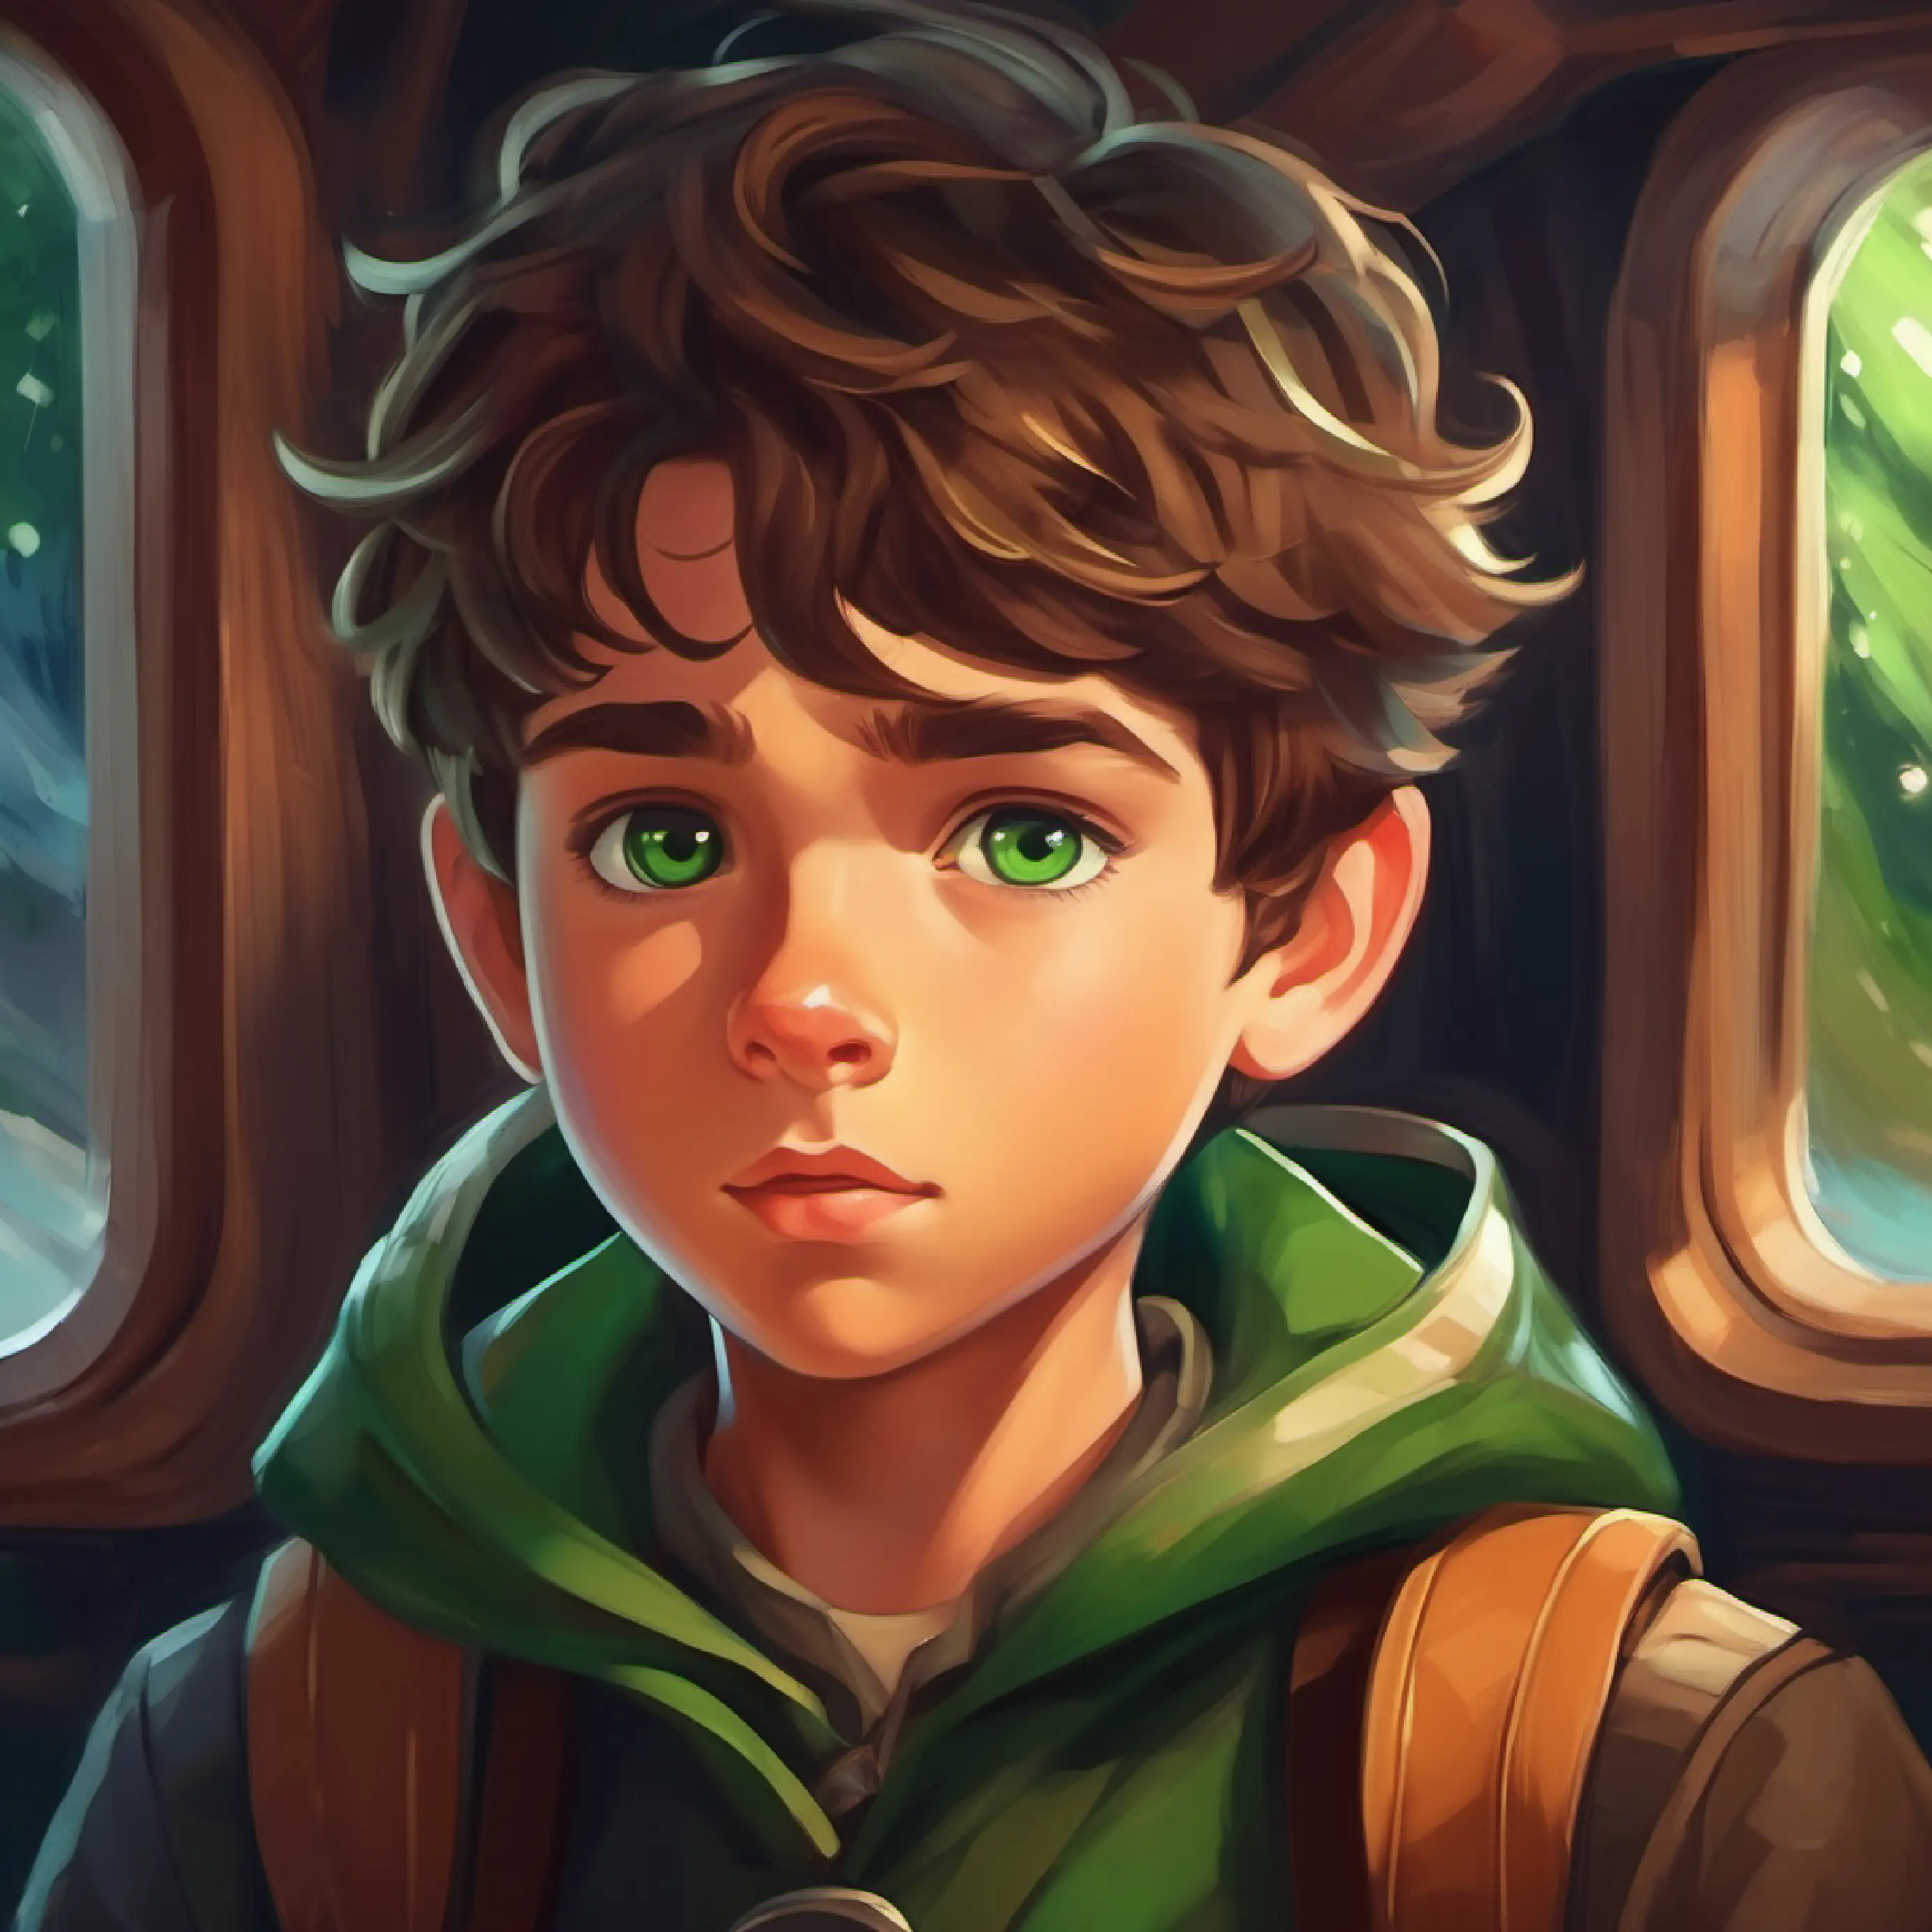 Explains storm visuals, Young, brave boy with brown hair, green eyes, ready for adventure feels a pull towards it